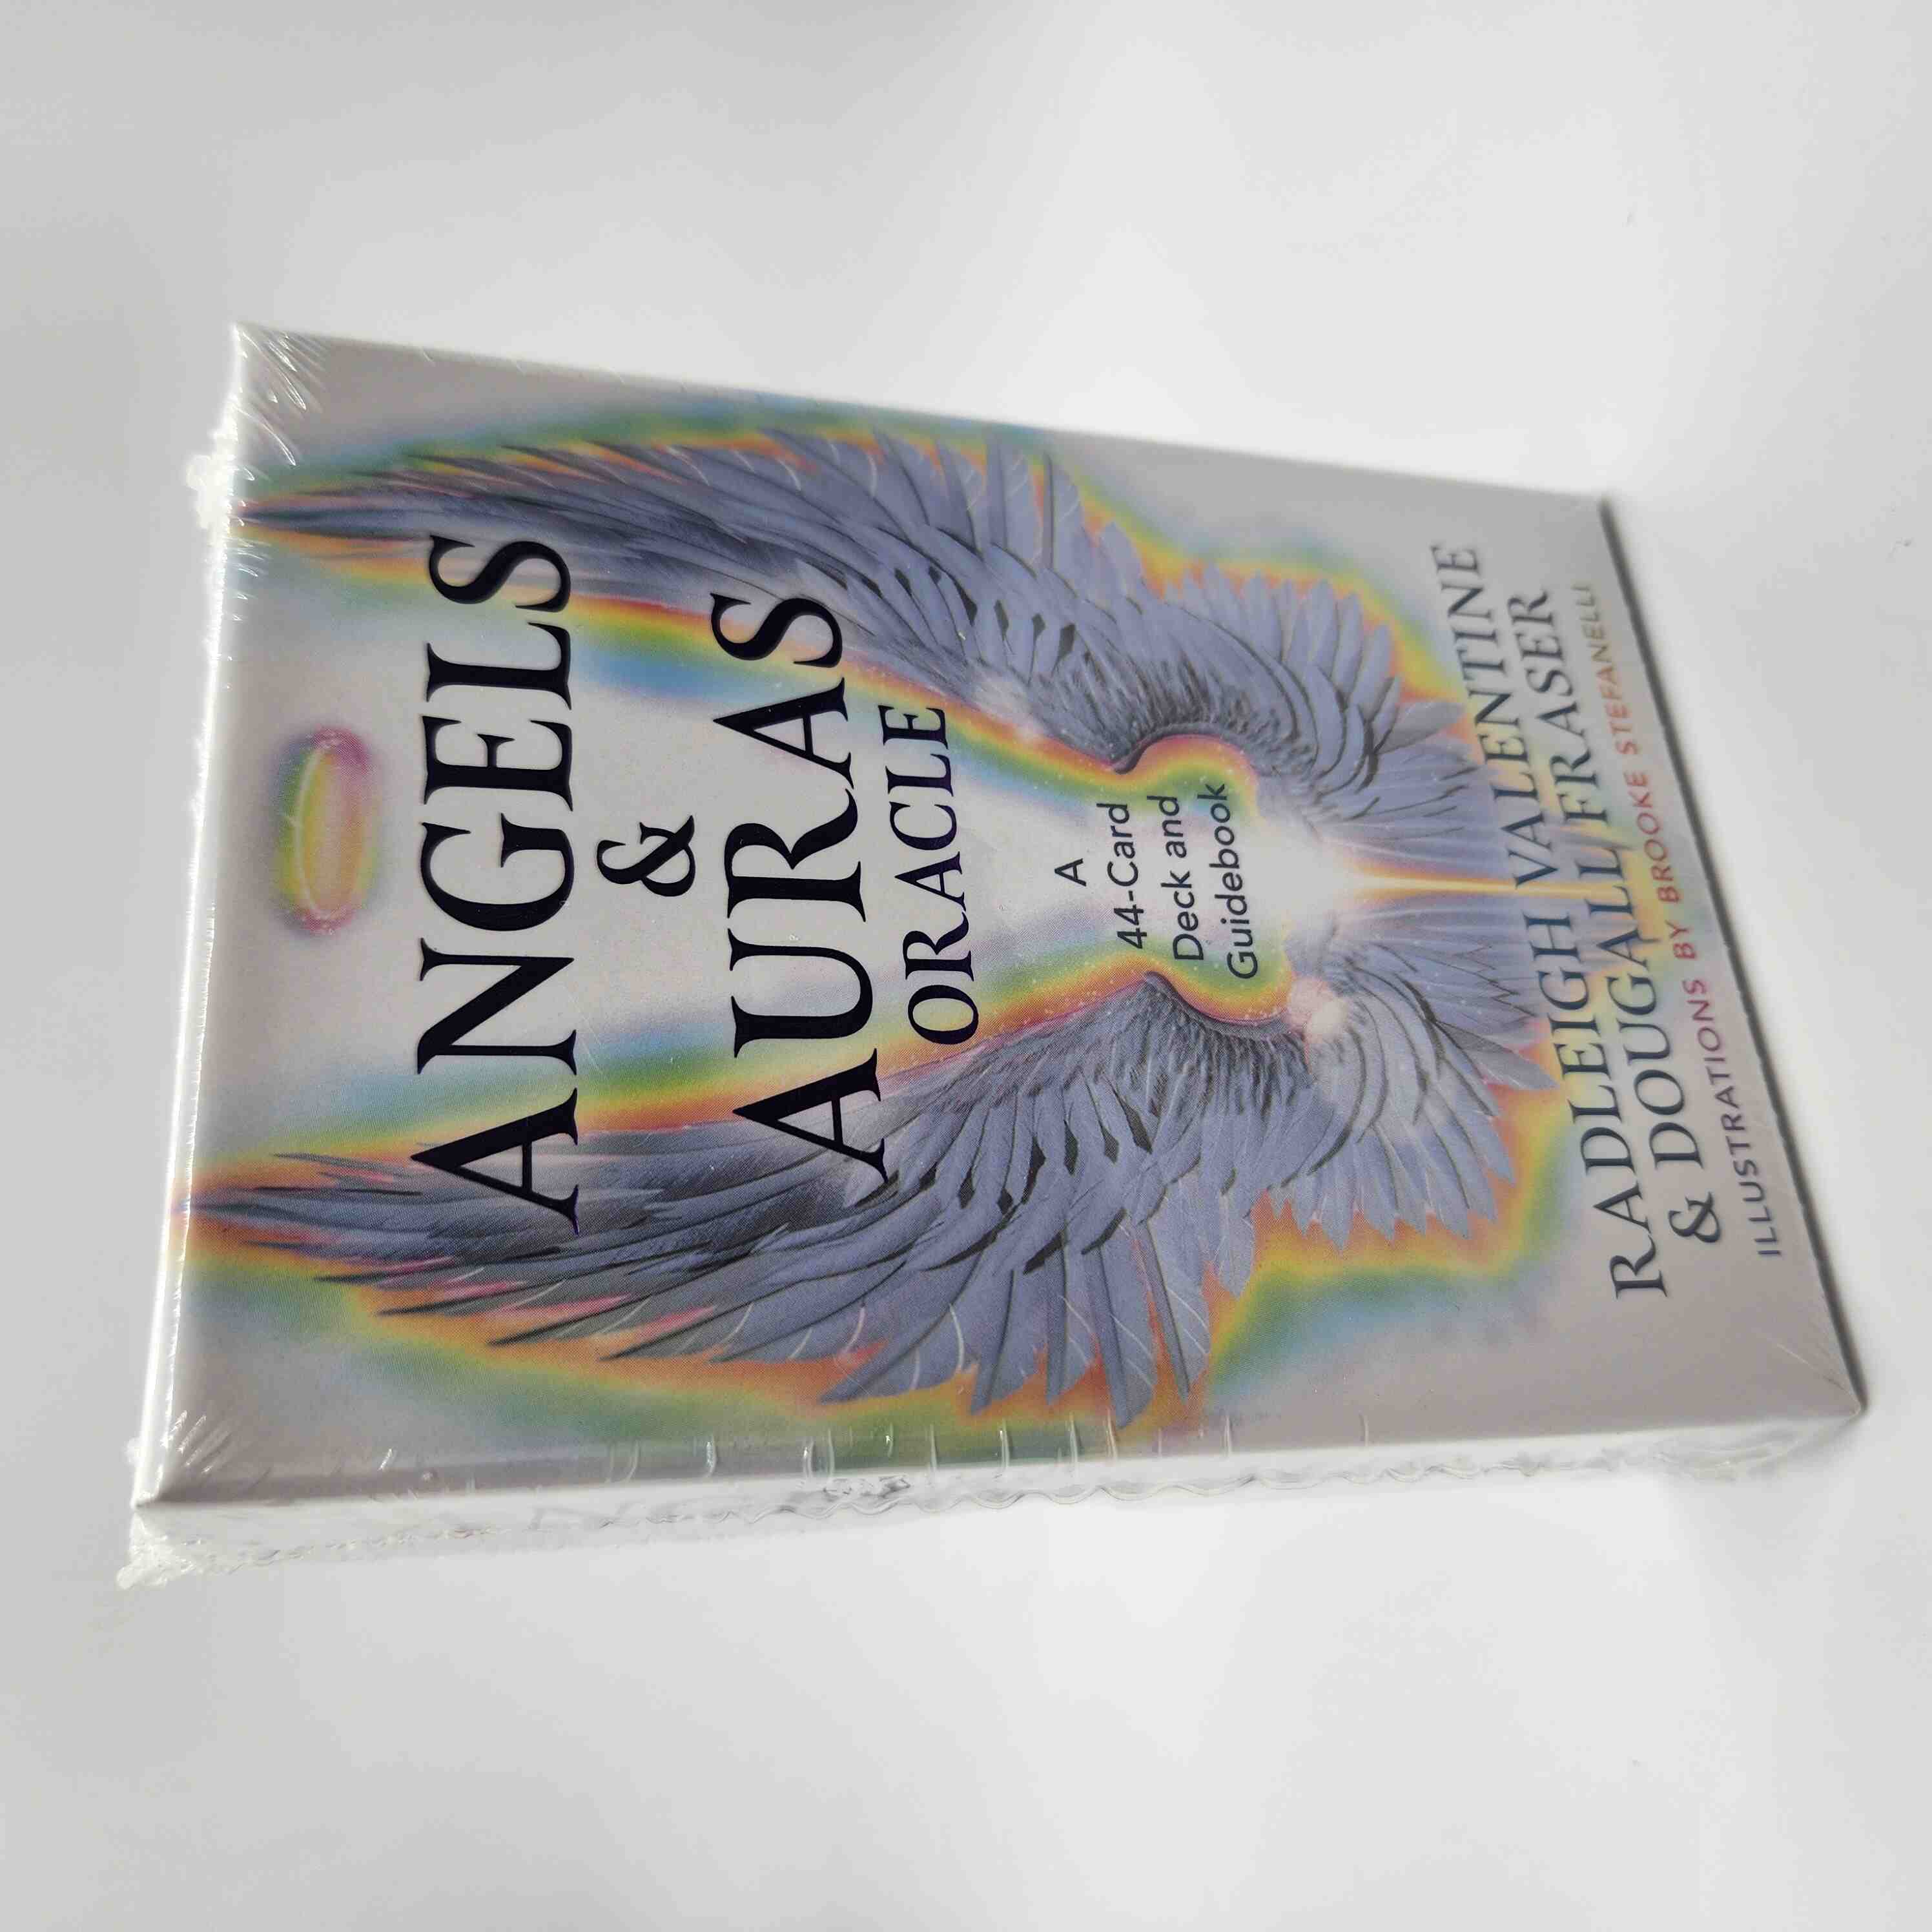 Angels and Auras Oracle Cards